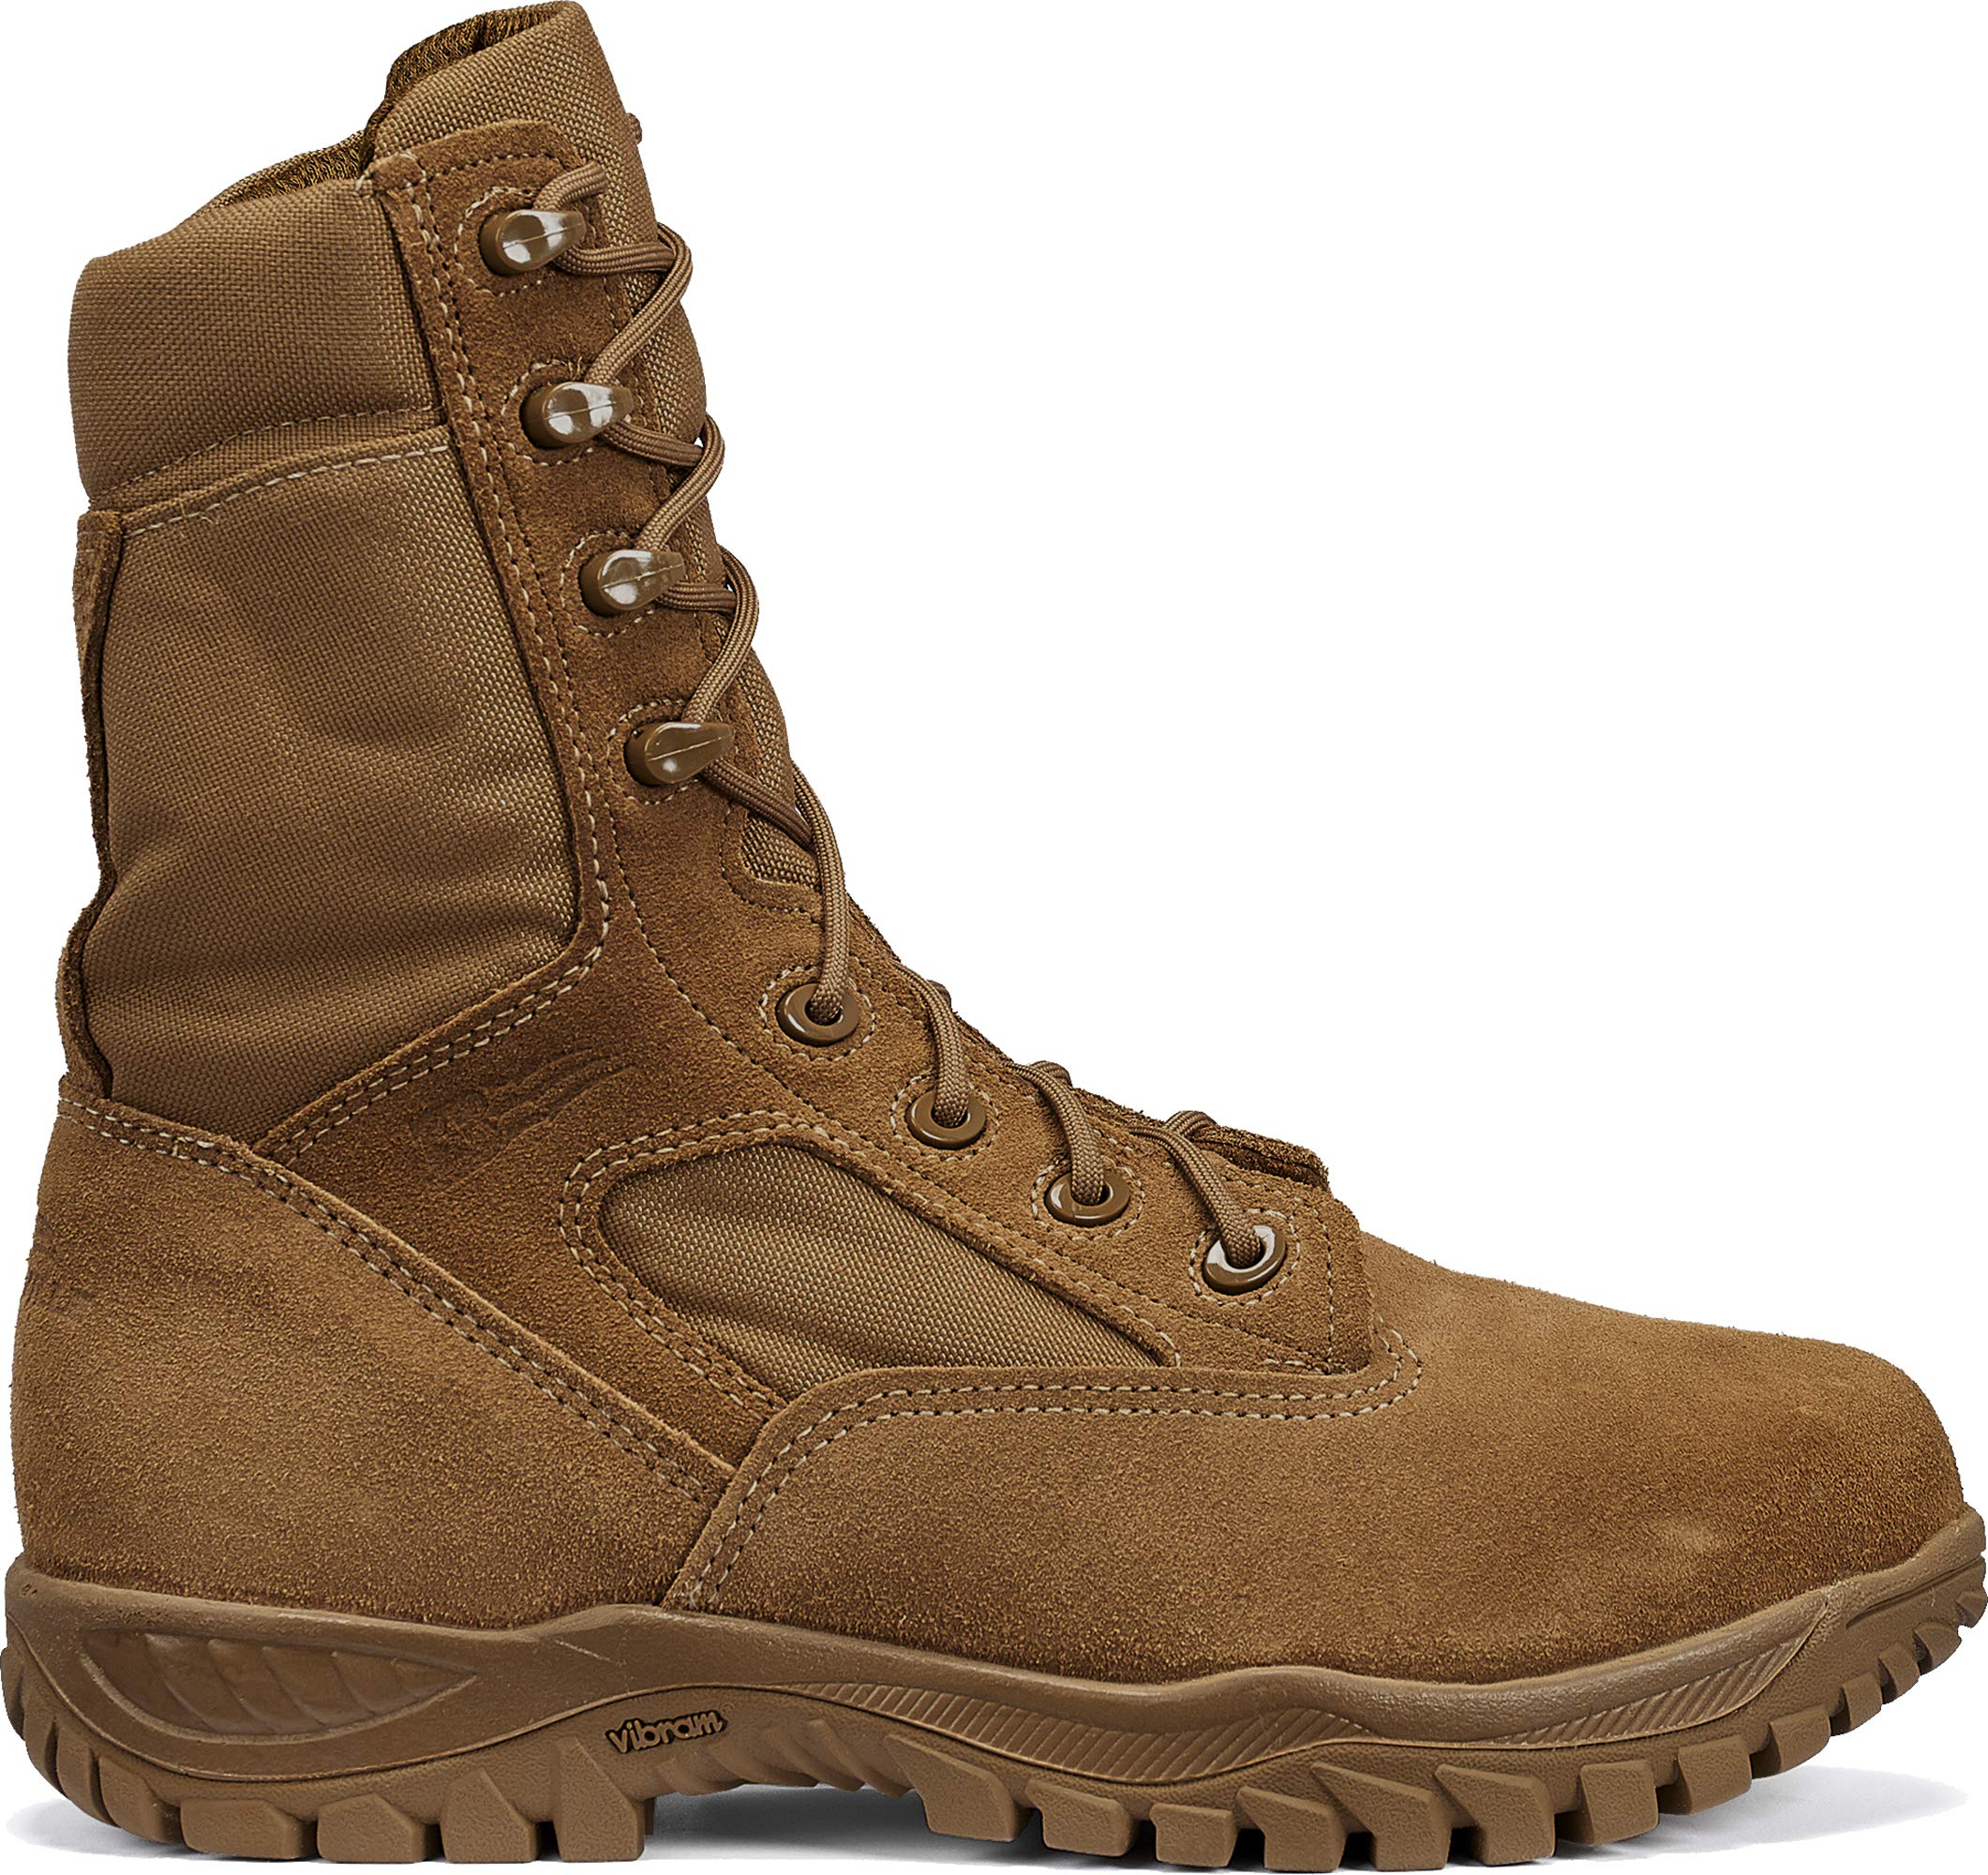 Belleville C312 ST 8” Hot Weather Steel Toe Tactical Boots for Men - AR 670-1/AFI 36-2903 Coyote Brown Leather with Slip-Resistant Vibram Incisor Outsole; Berry Compliant